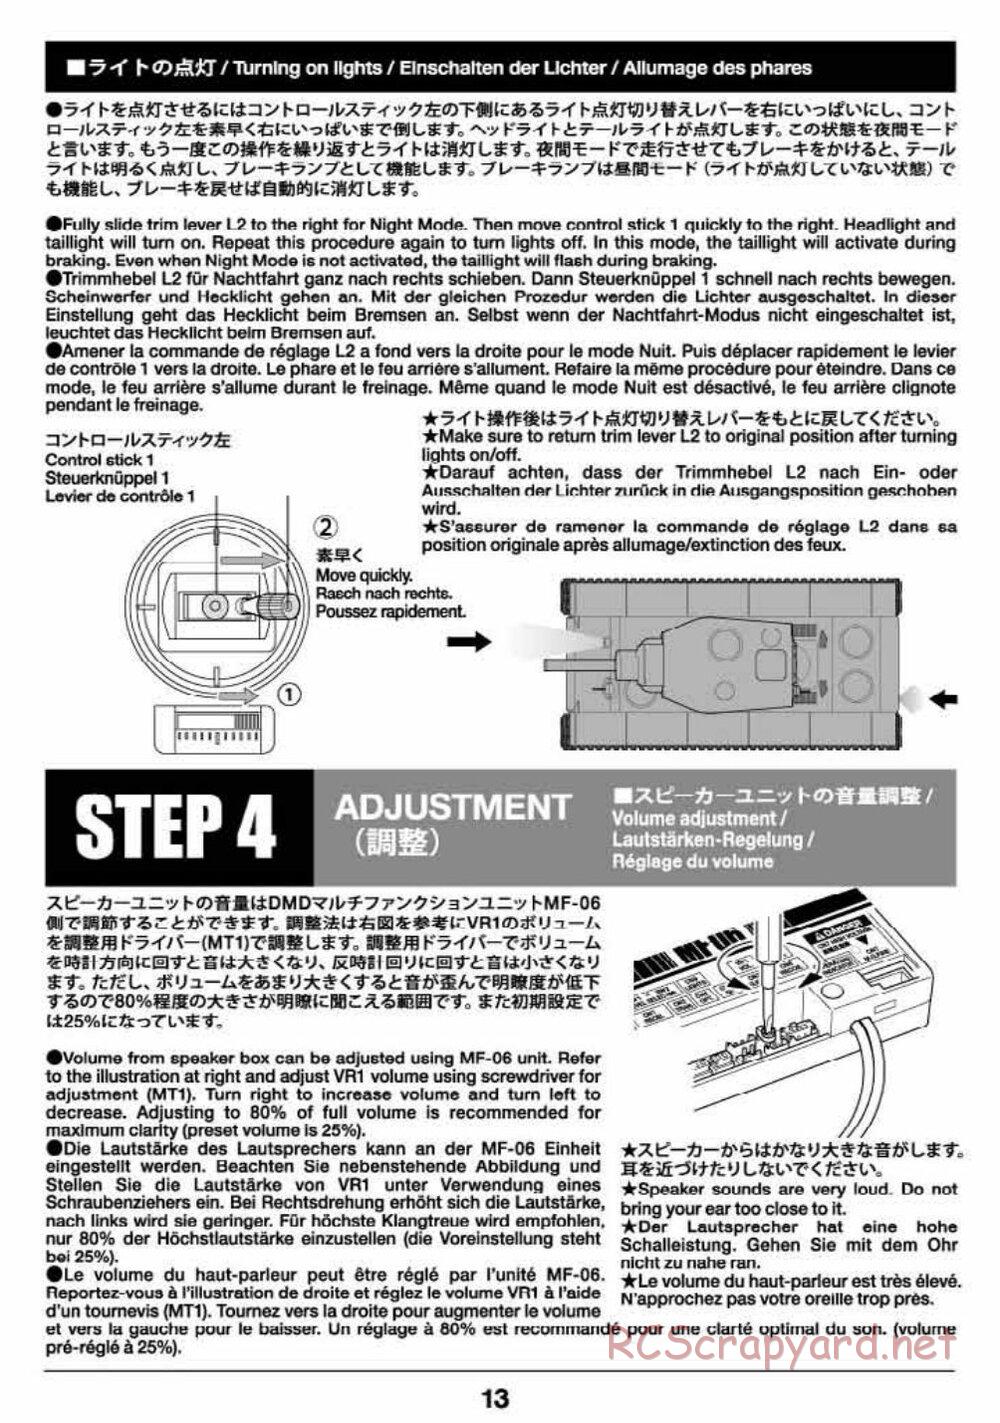 Tamiya - Russian Heavy Tank KV-2 Gigant - 1/16 Scale Chassis - Operation Manual - Page 13